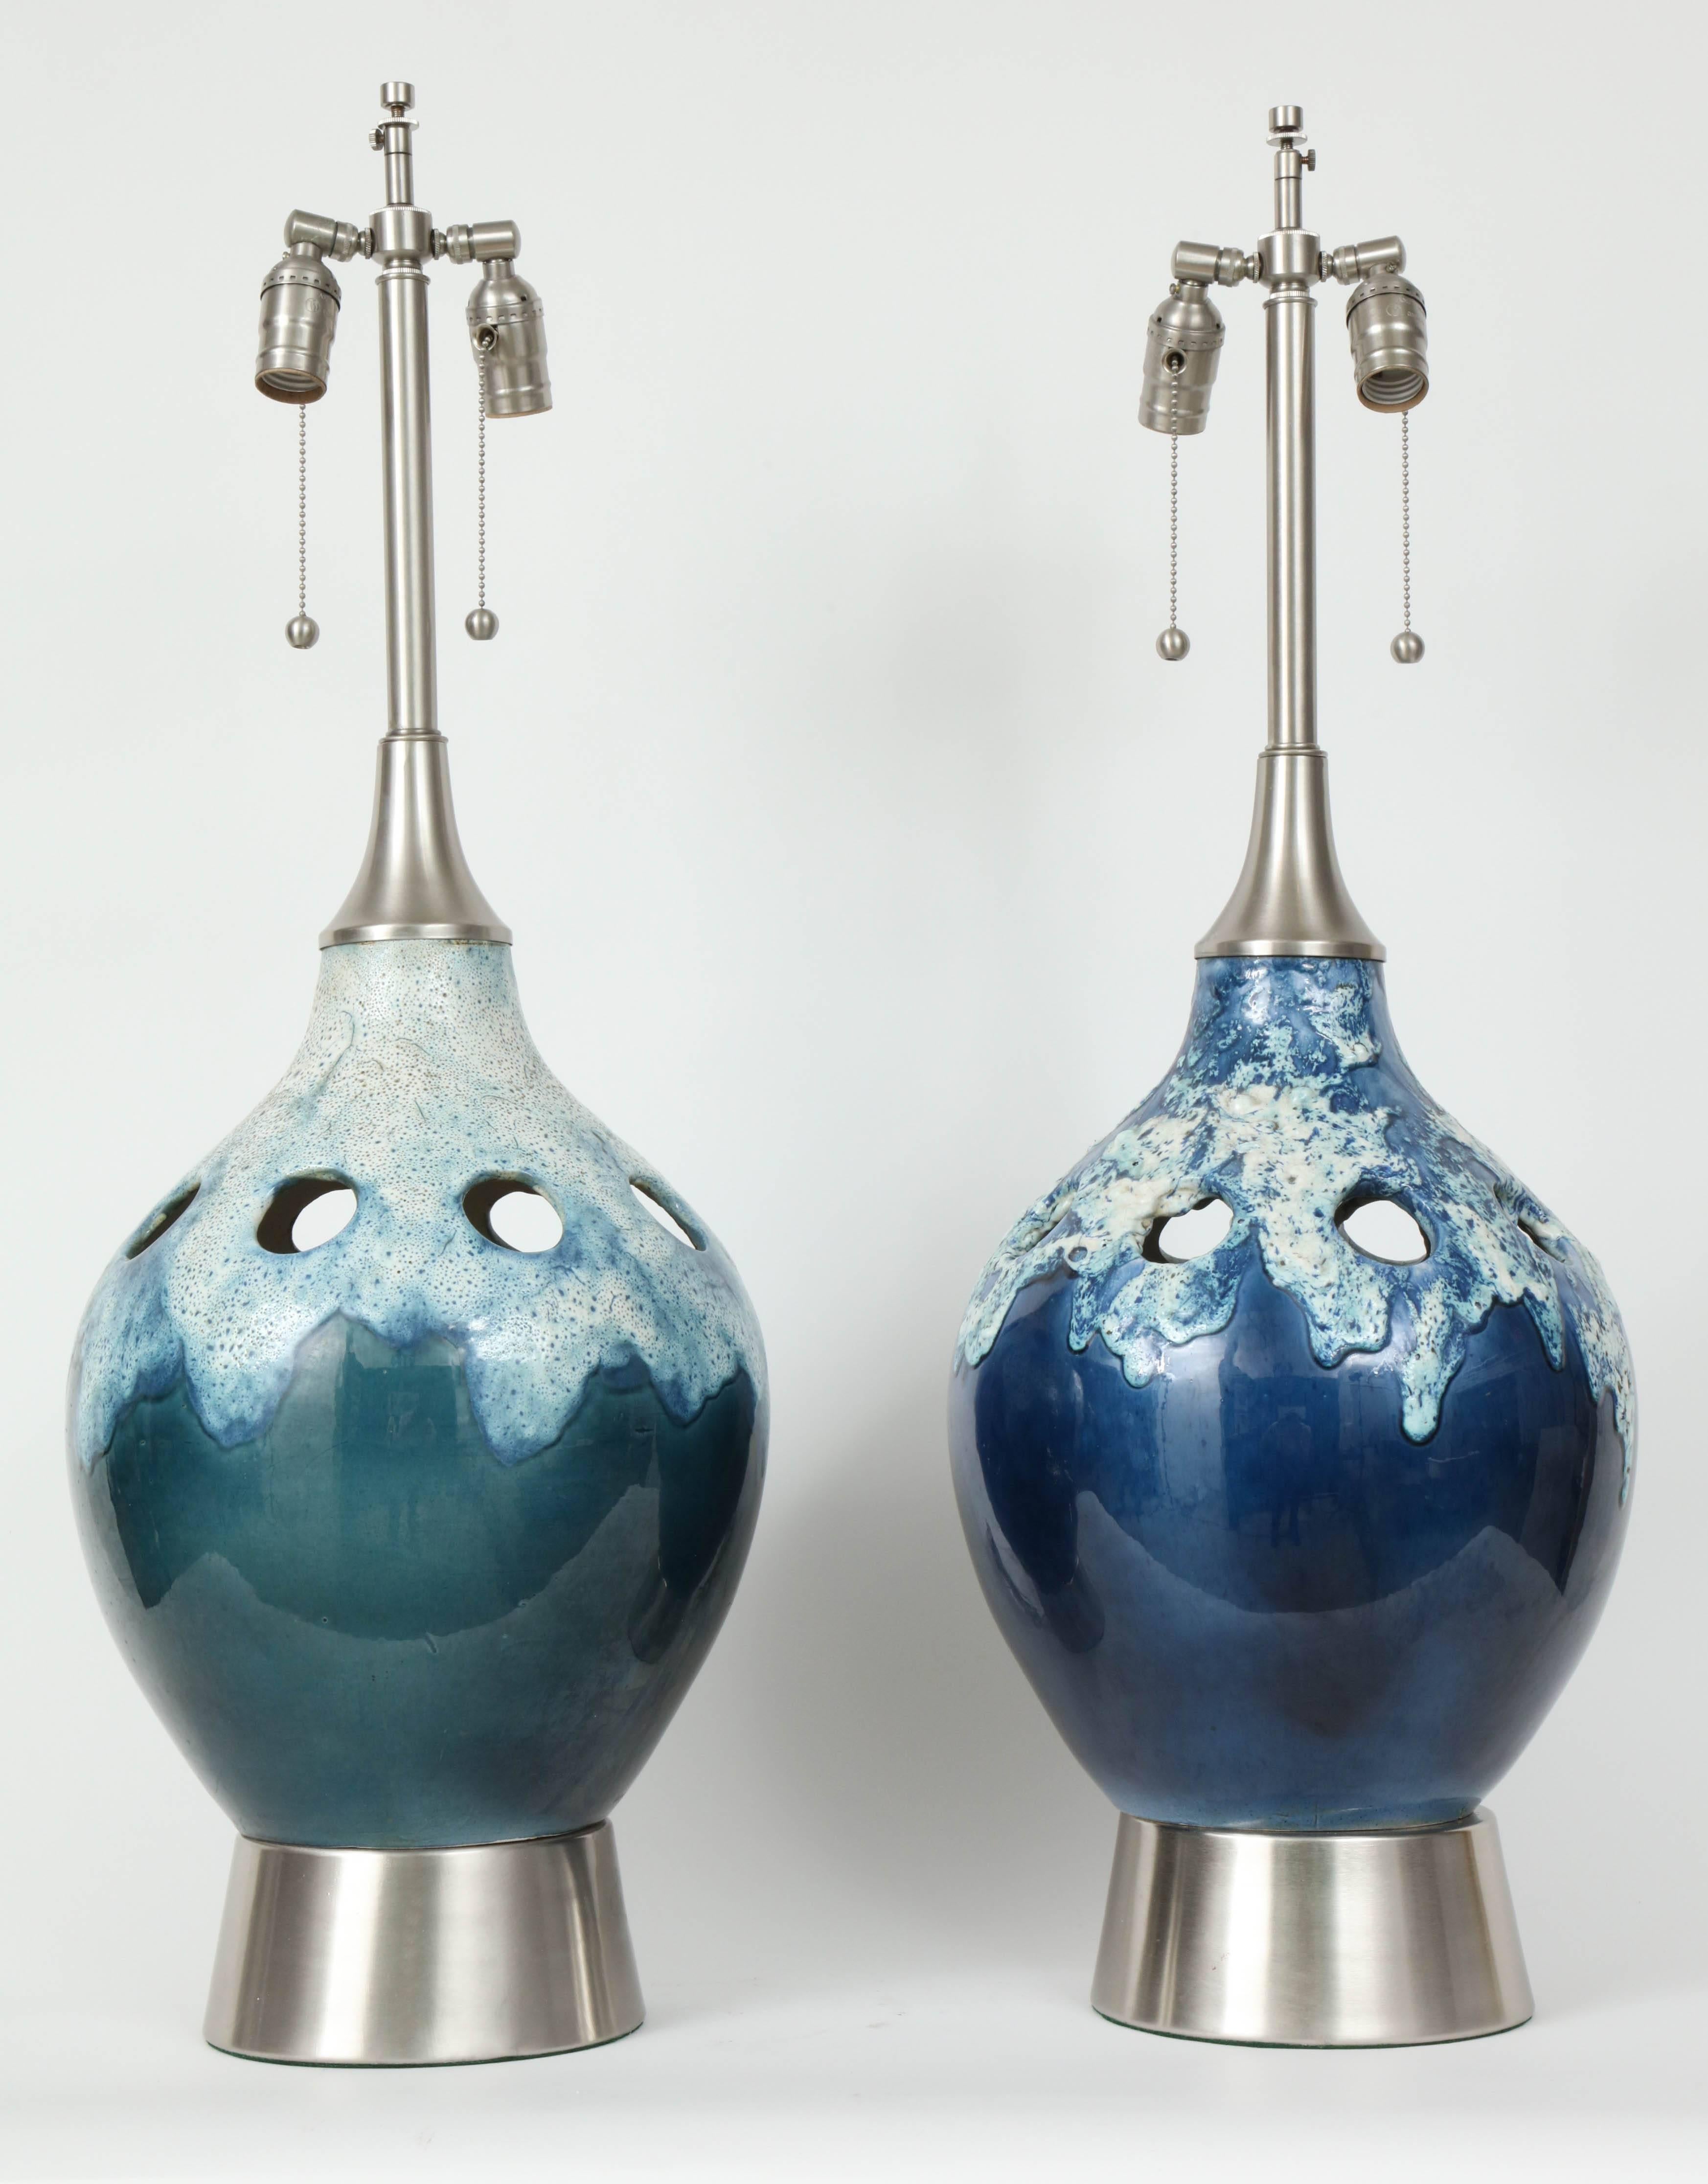 Pair of impressive scale ceramic lamps in tones of blue and green with white froth lava glaze overlay and pierced detail. Lamps sit on satin nickel bases and have satin nickel collars. Rewired for use in the USA with double pull chain sockets.